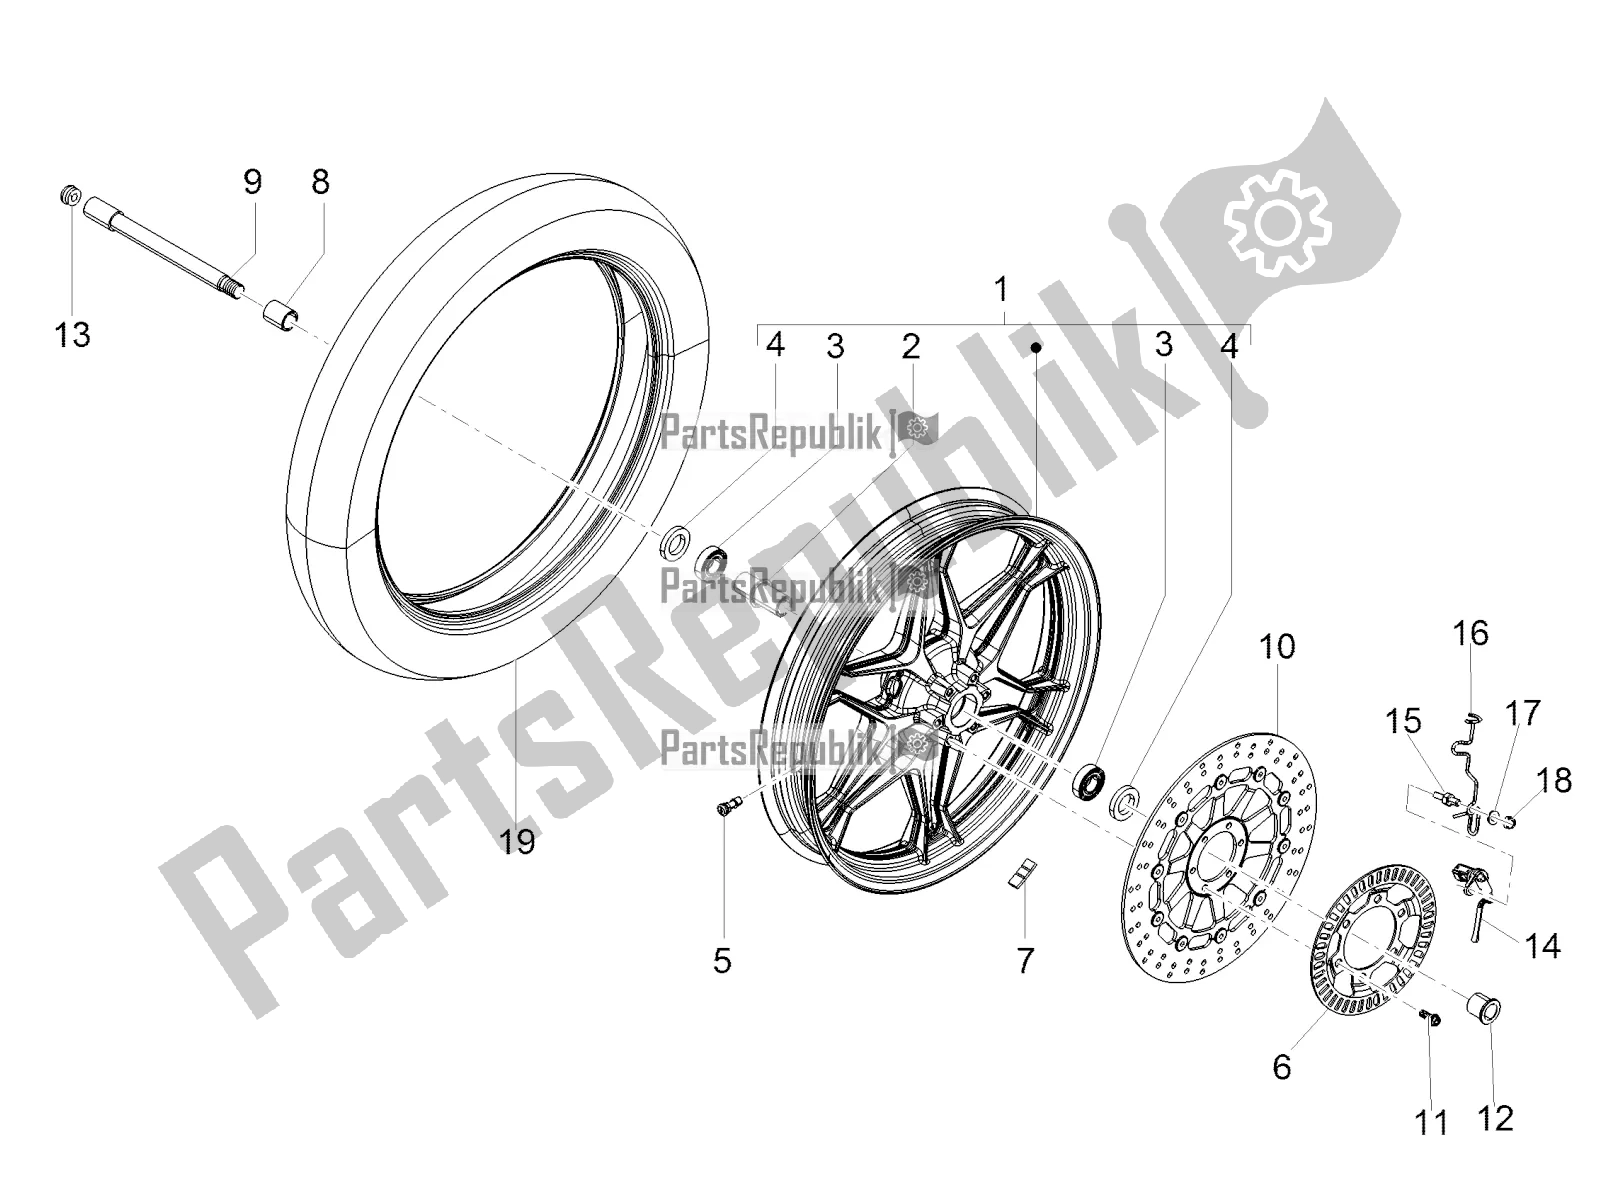 All parts for the Front Wheel of the Moto-Guzzi V7 III Stone 